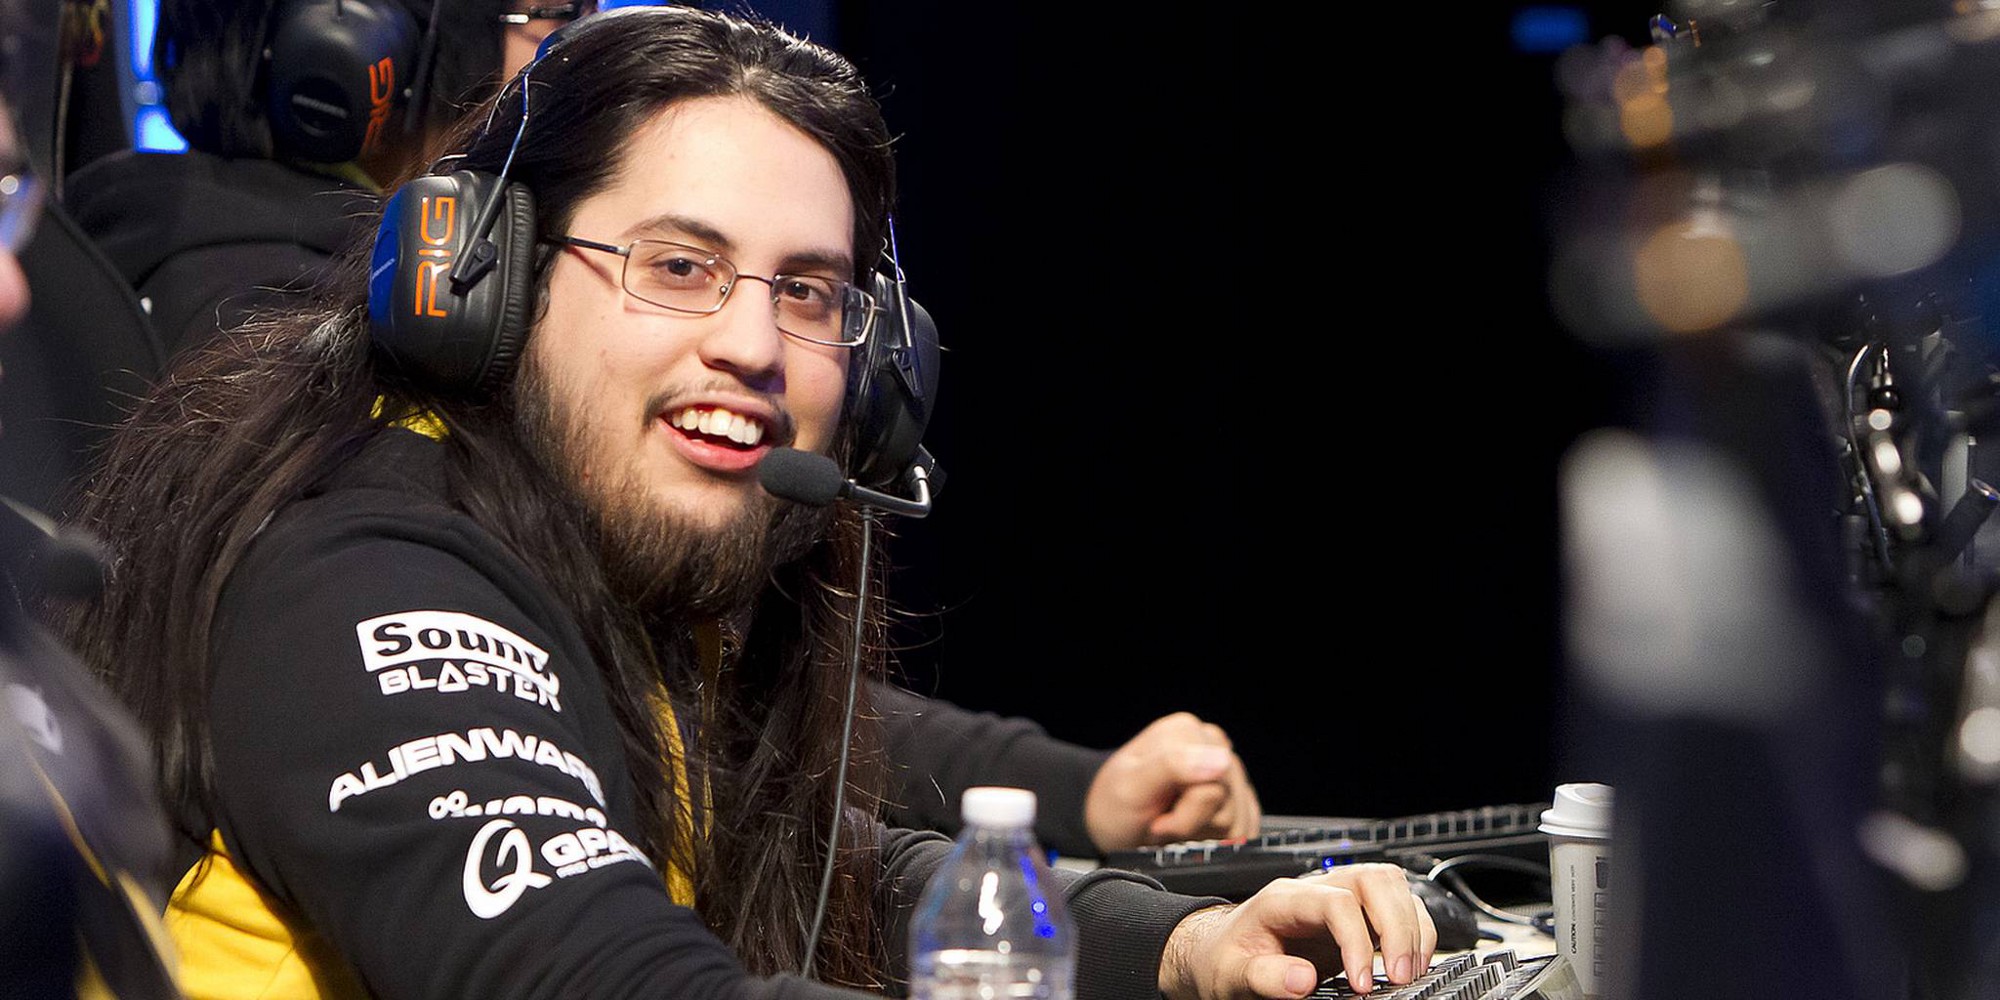 Imaqtpie, Scarra, Dyrus, Voyboy, and Shiphtur are Echo Fox’s new Challenger...